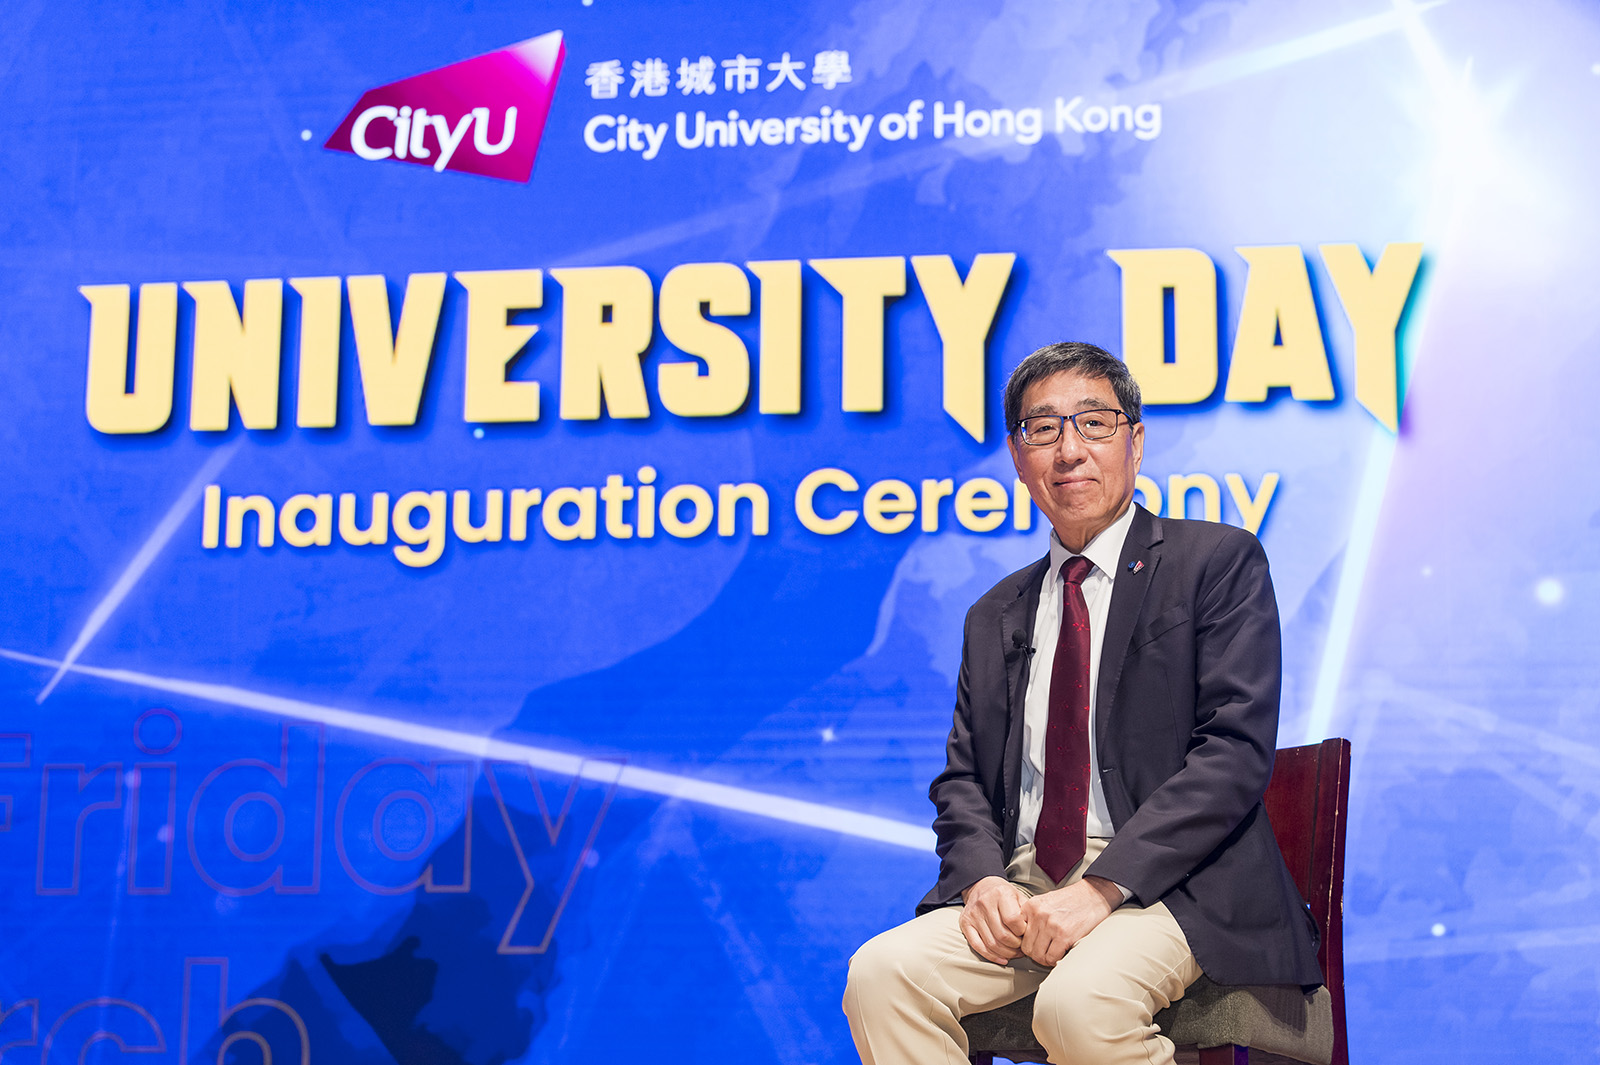 President Kuo says U-Day aims to communicate to the community more about our very special brand, and share and celebrate the CityU’s remarkable accomplishment.